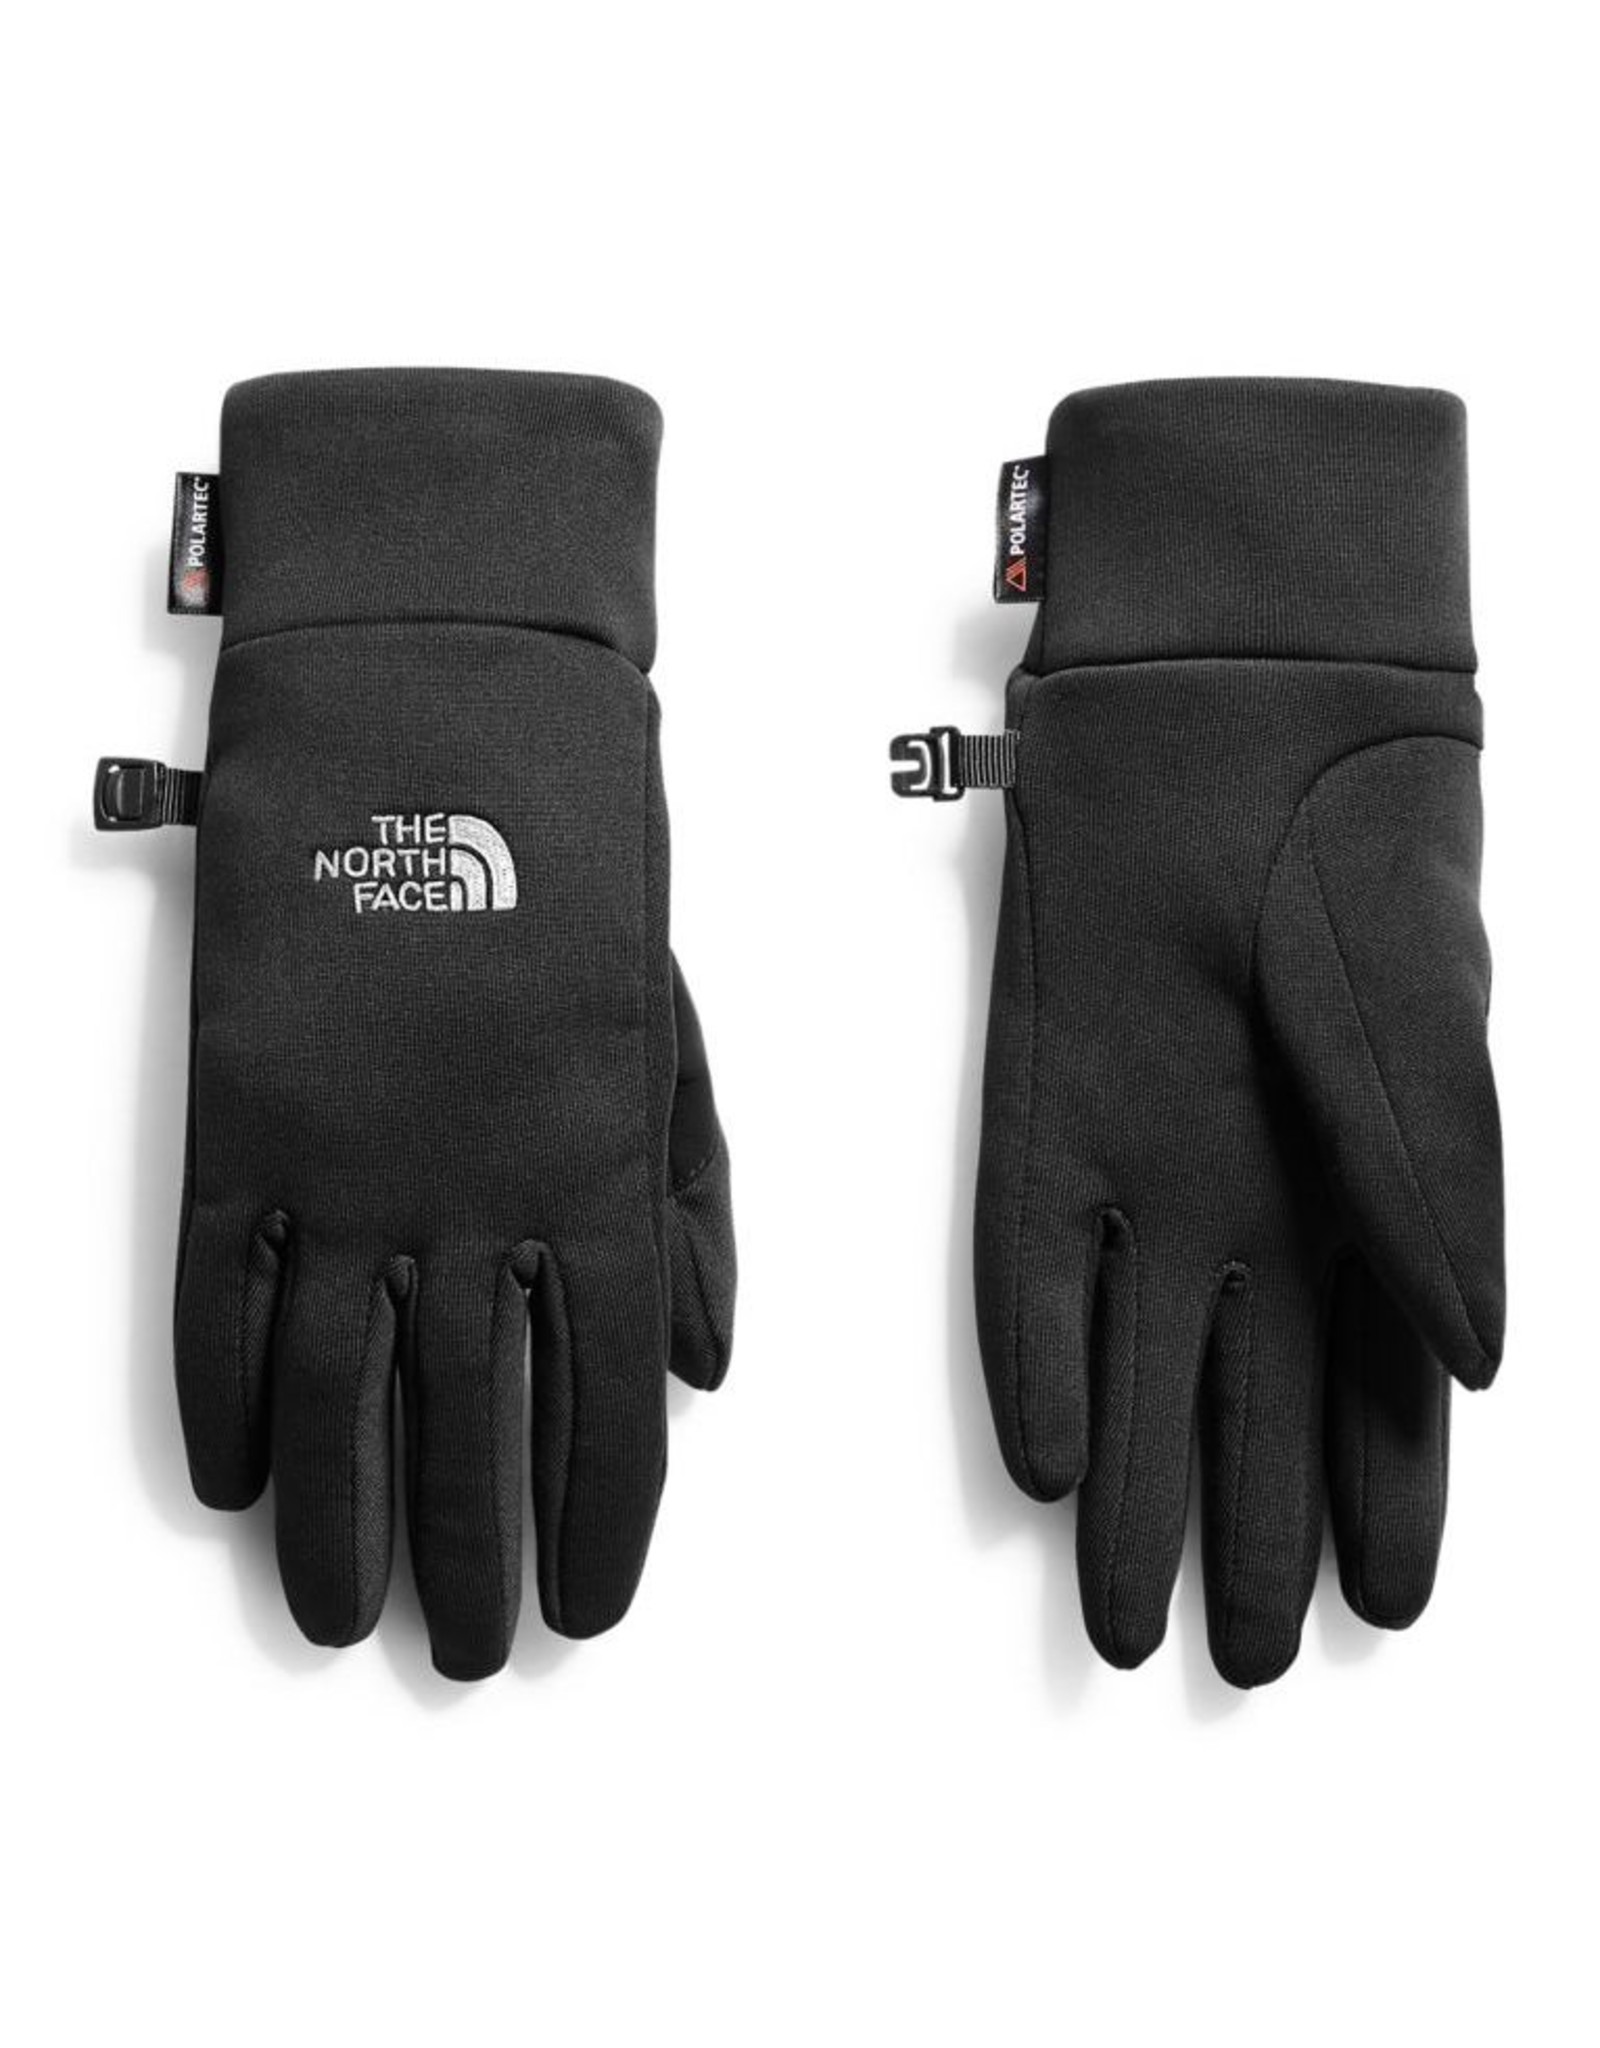 The North Face Power Stretch Glove 